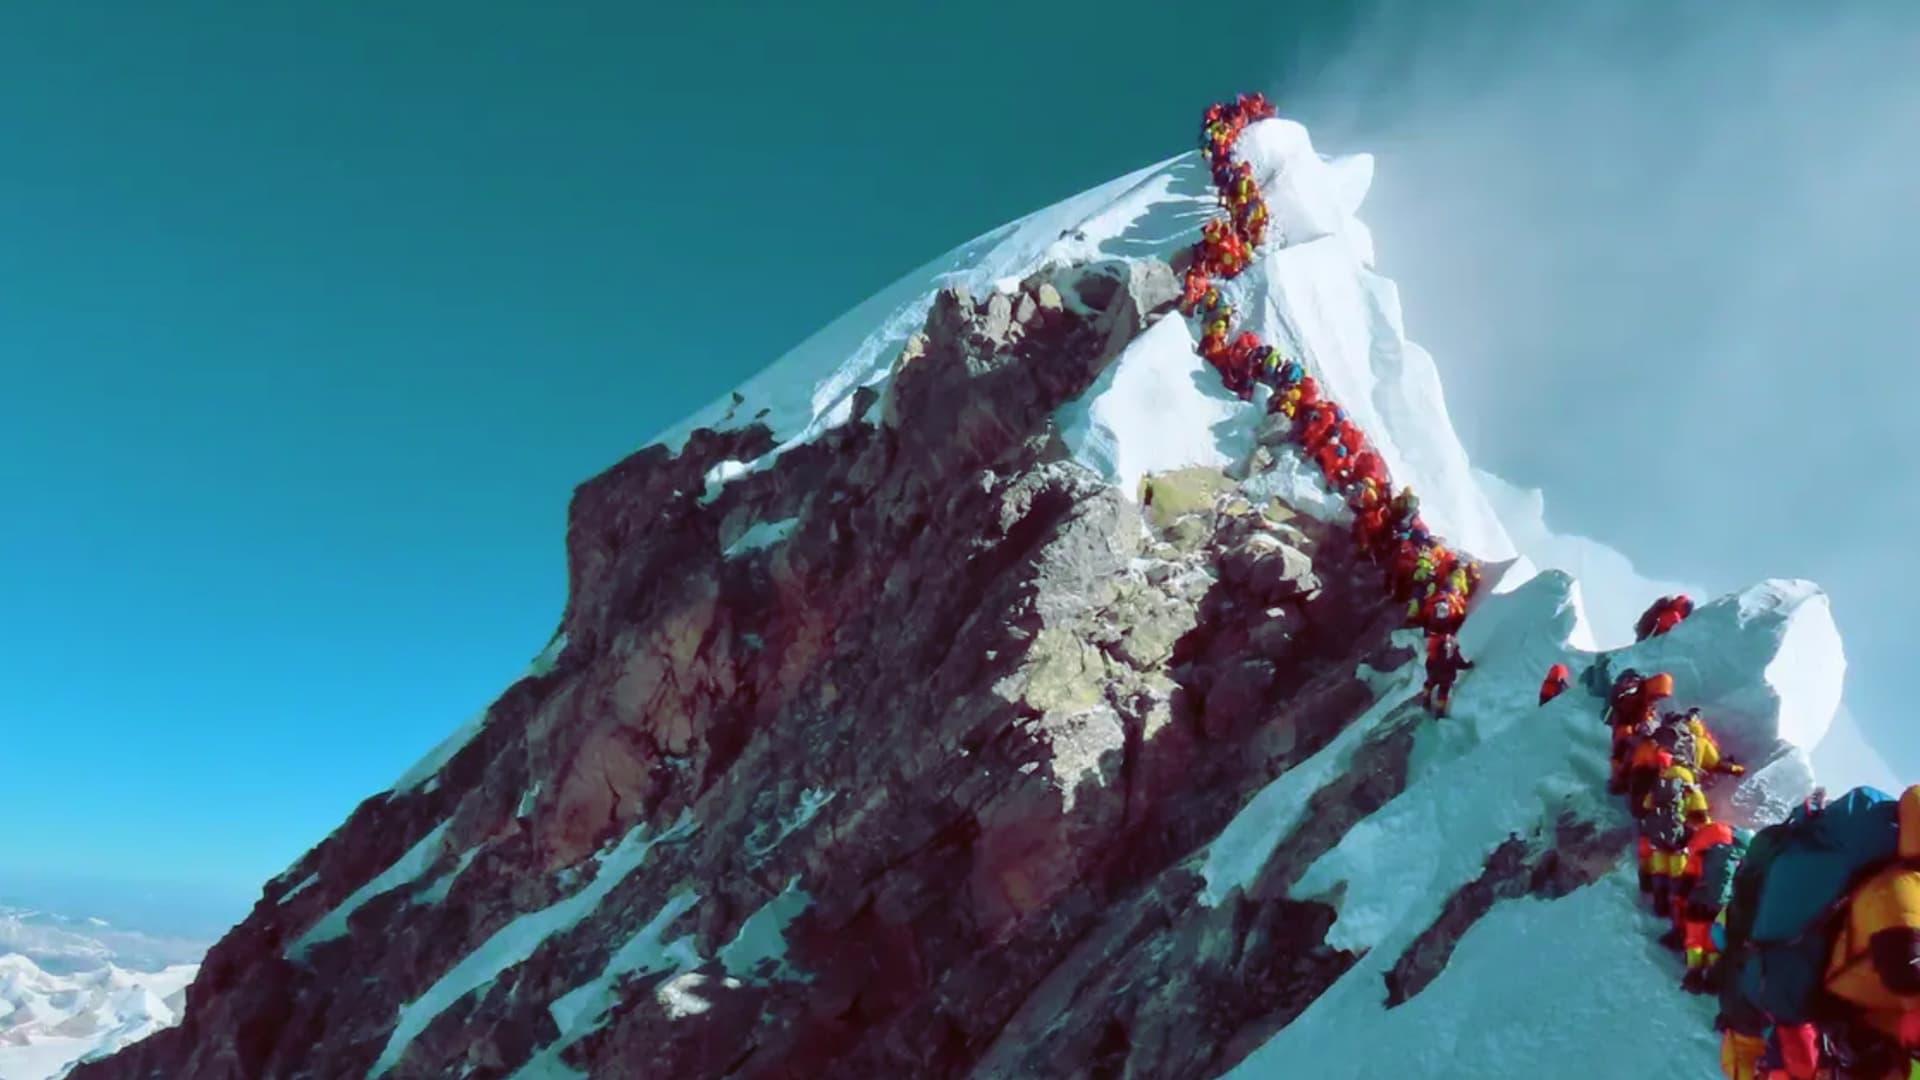 Remnants of Everest: The 1996 Tragedy backdrop